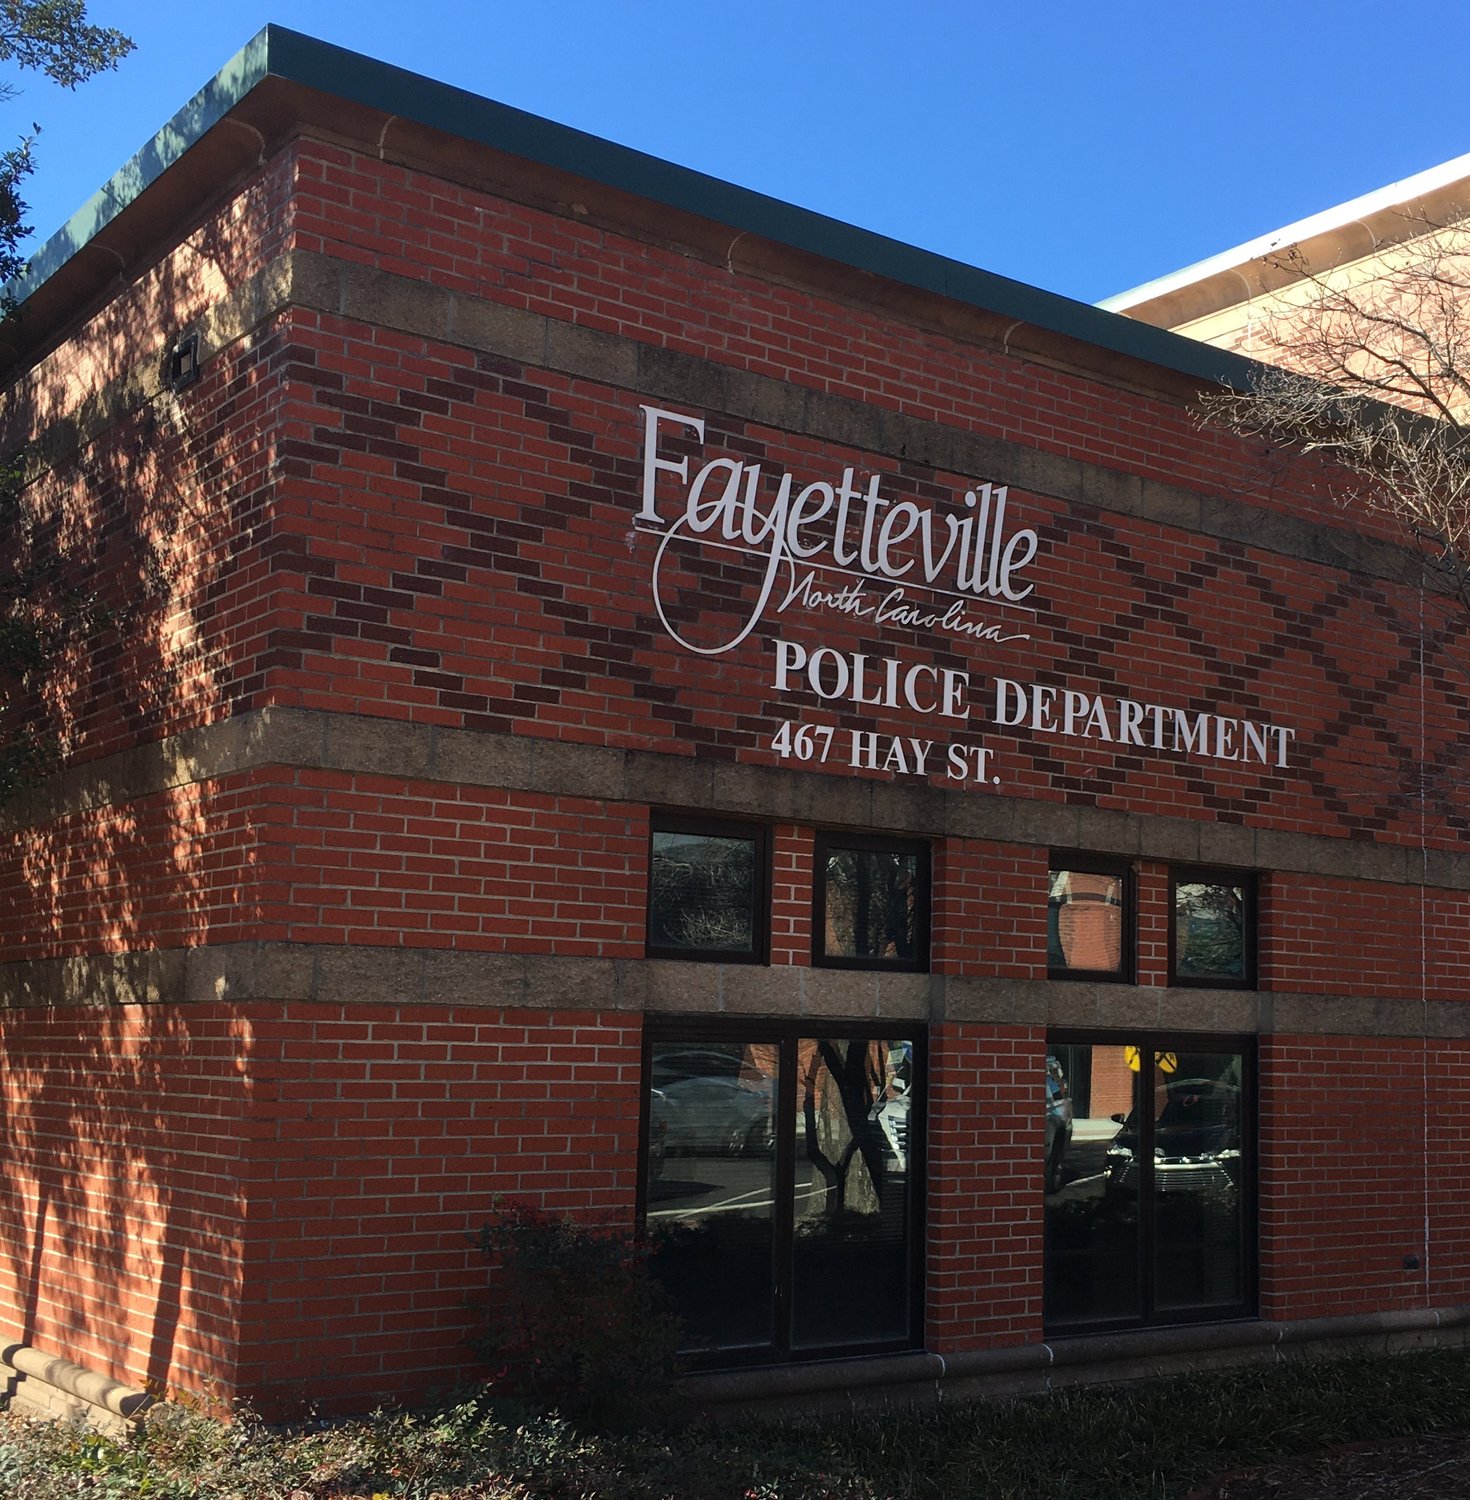 The Community Police Advisory Board has been learning about the Fayetteville Police Department, its policies and procedures and other information its members will need to carry out their roles.